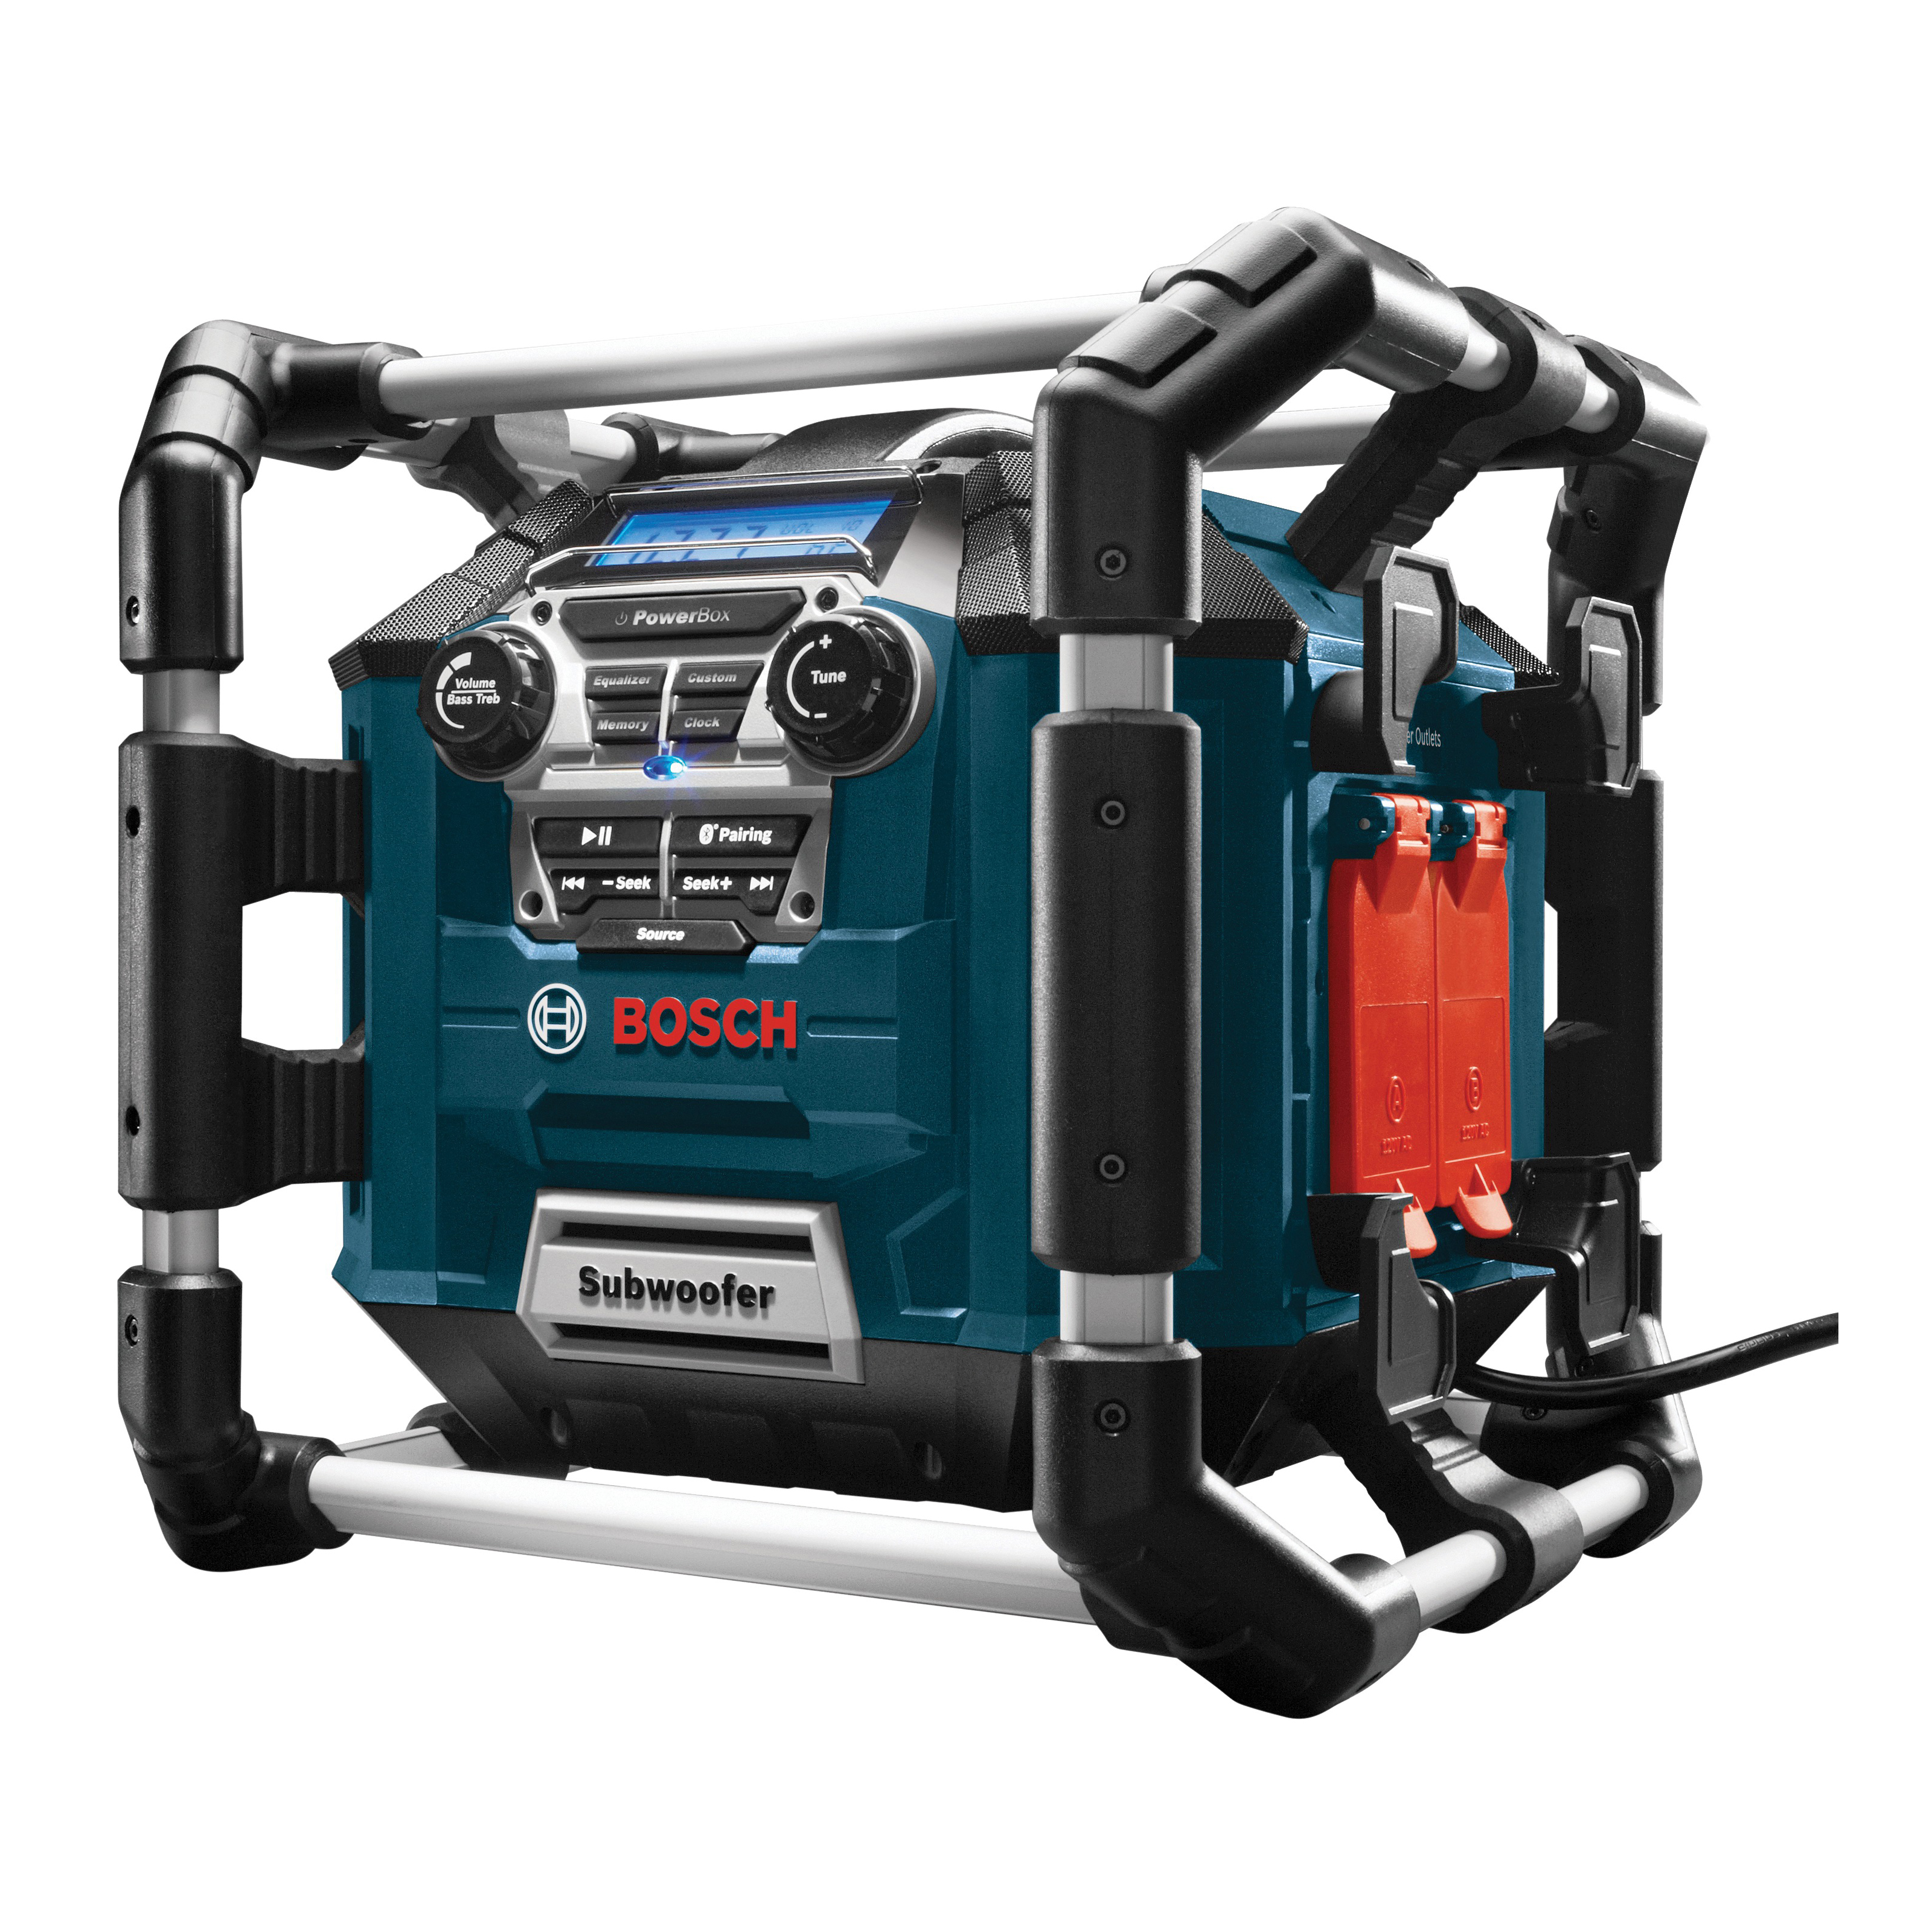 PB360C Power Box Jobsite Radio with Bluetooth, Battery Included, 18 V, 30-Channel